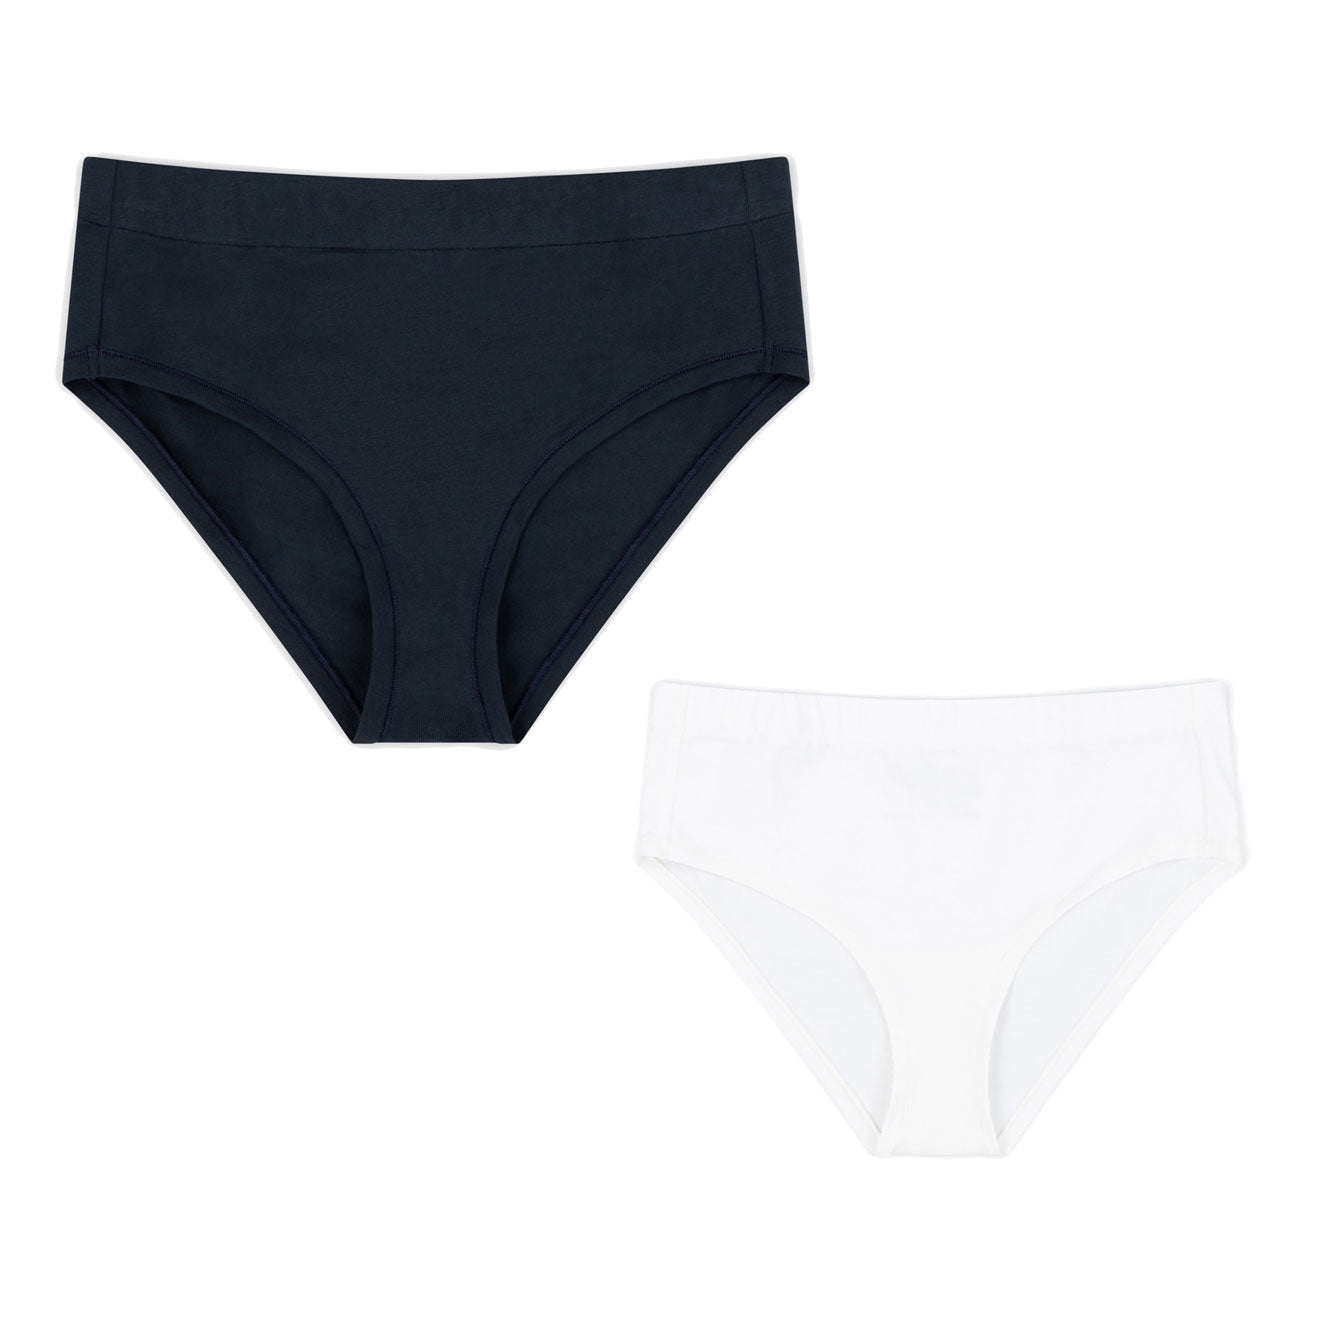 high rise brief in black and white, organic everyday basic underwear